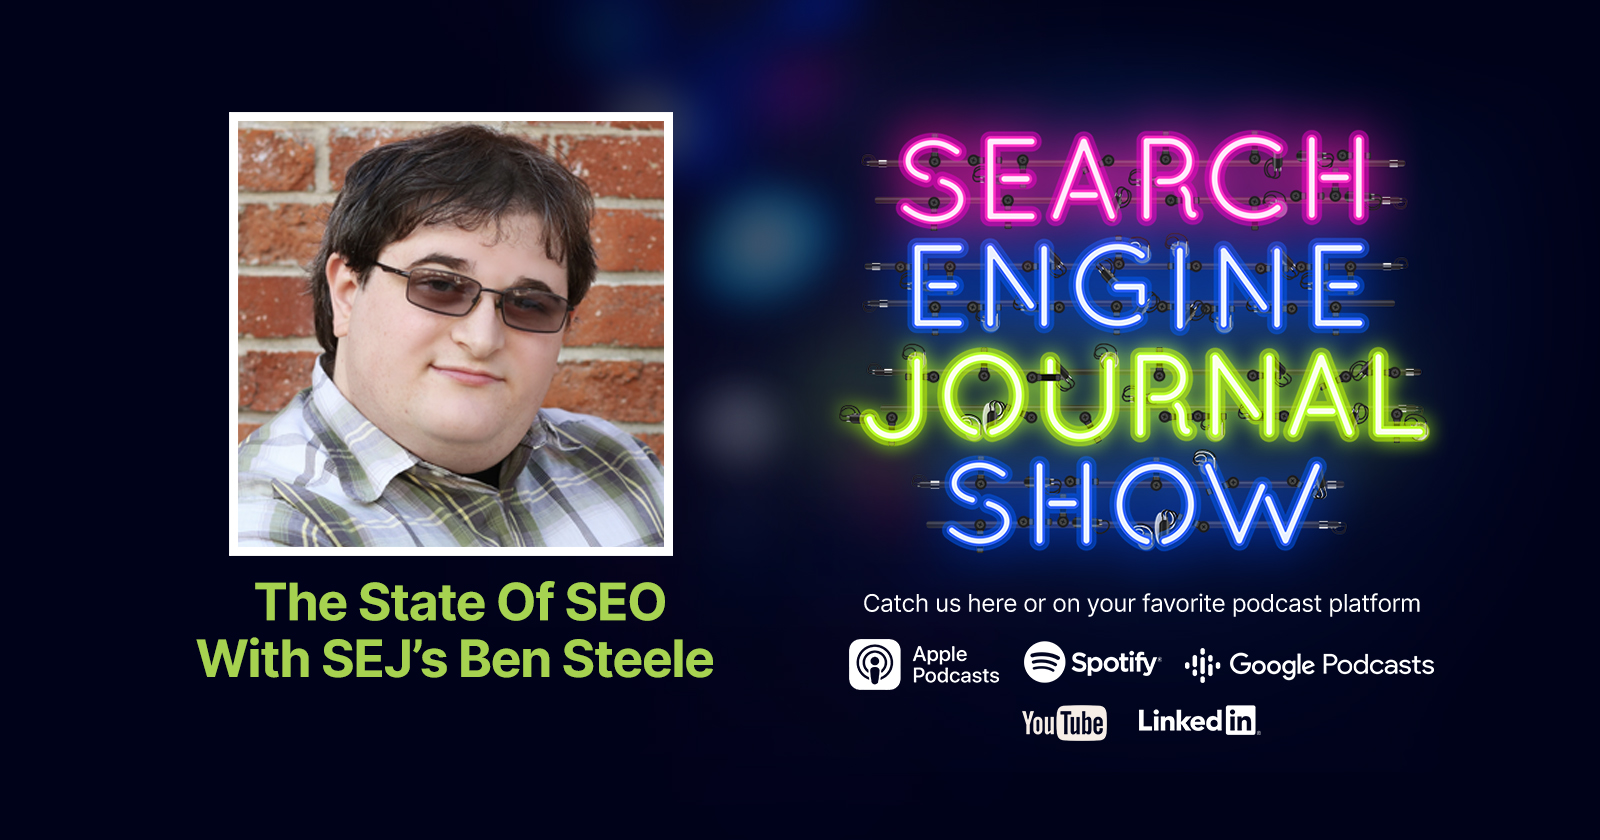 The State of SEO With SEJ’s Ben Steele [Podcast]